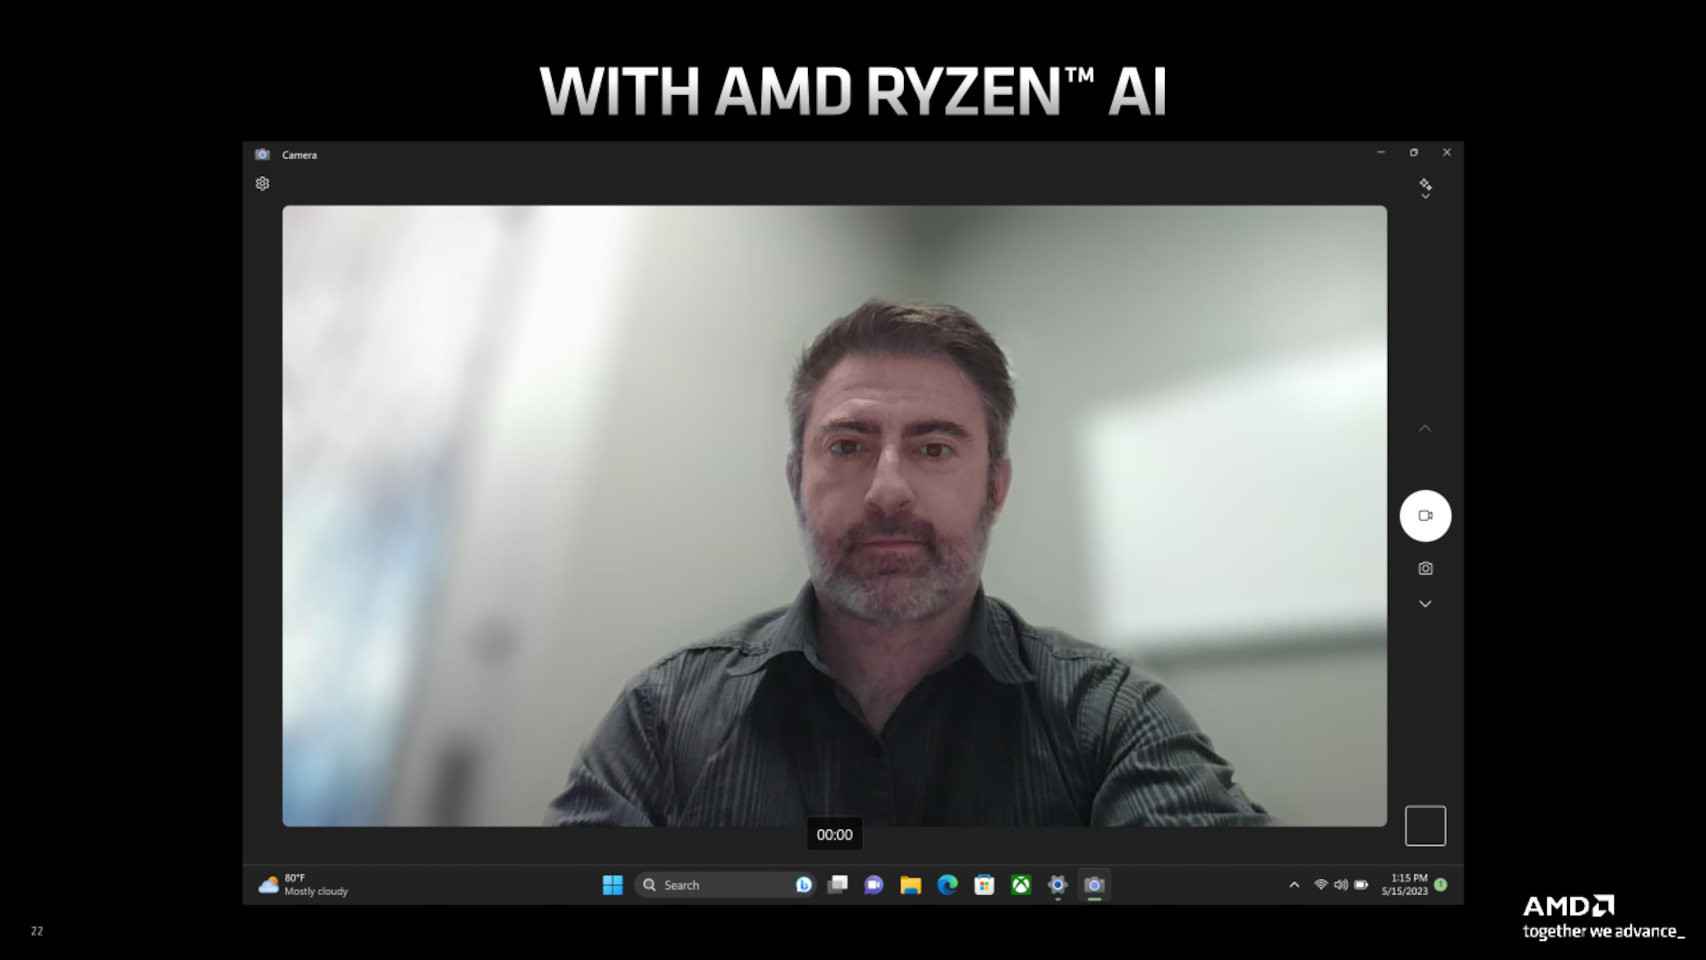 Windows is already able to use Artificial Intelligence functions with the new Ryzen